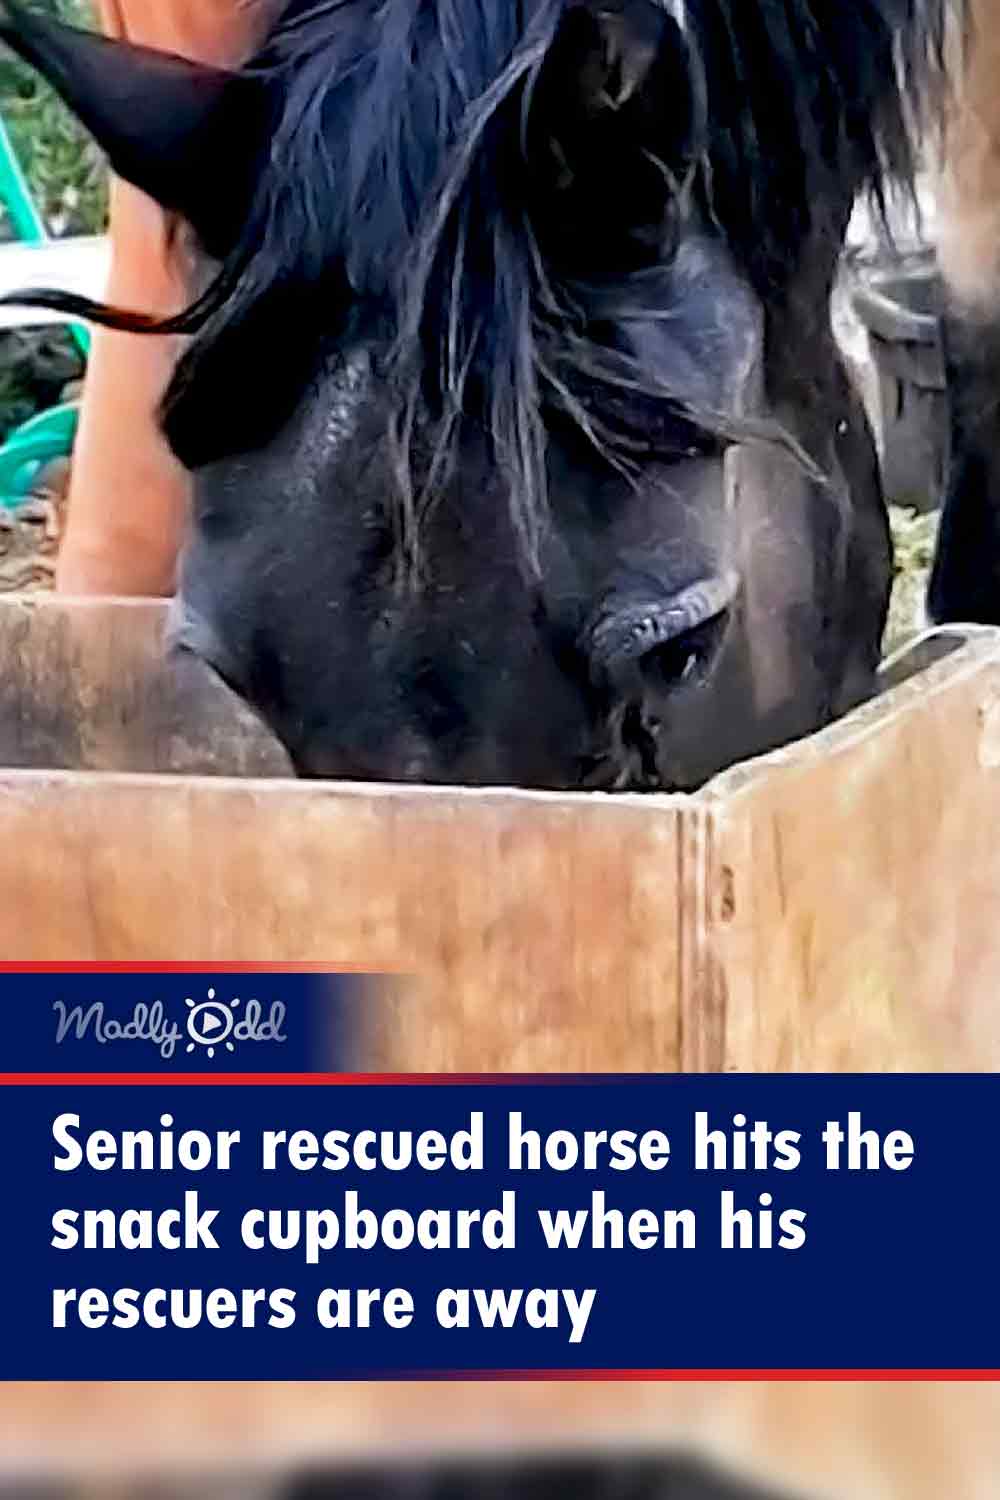 Senior rescued horse hits the snack cupboard when his rescuers are away